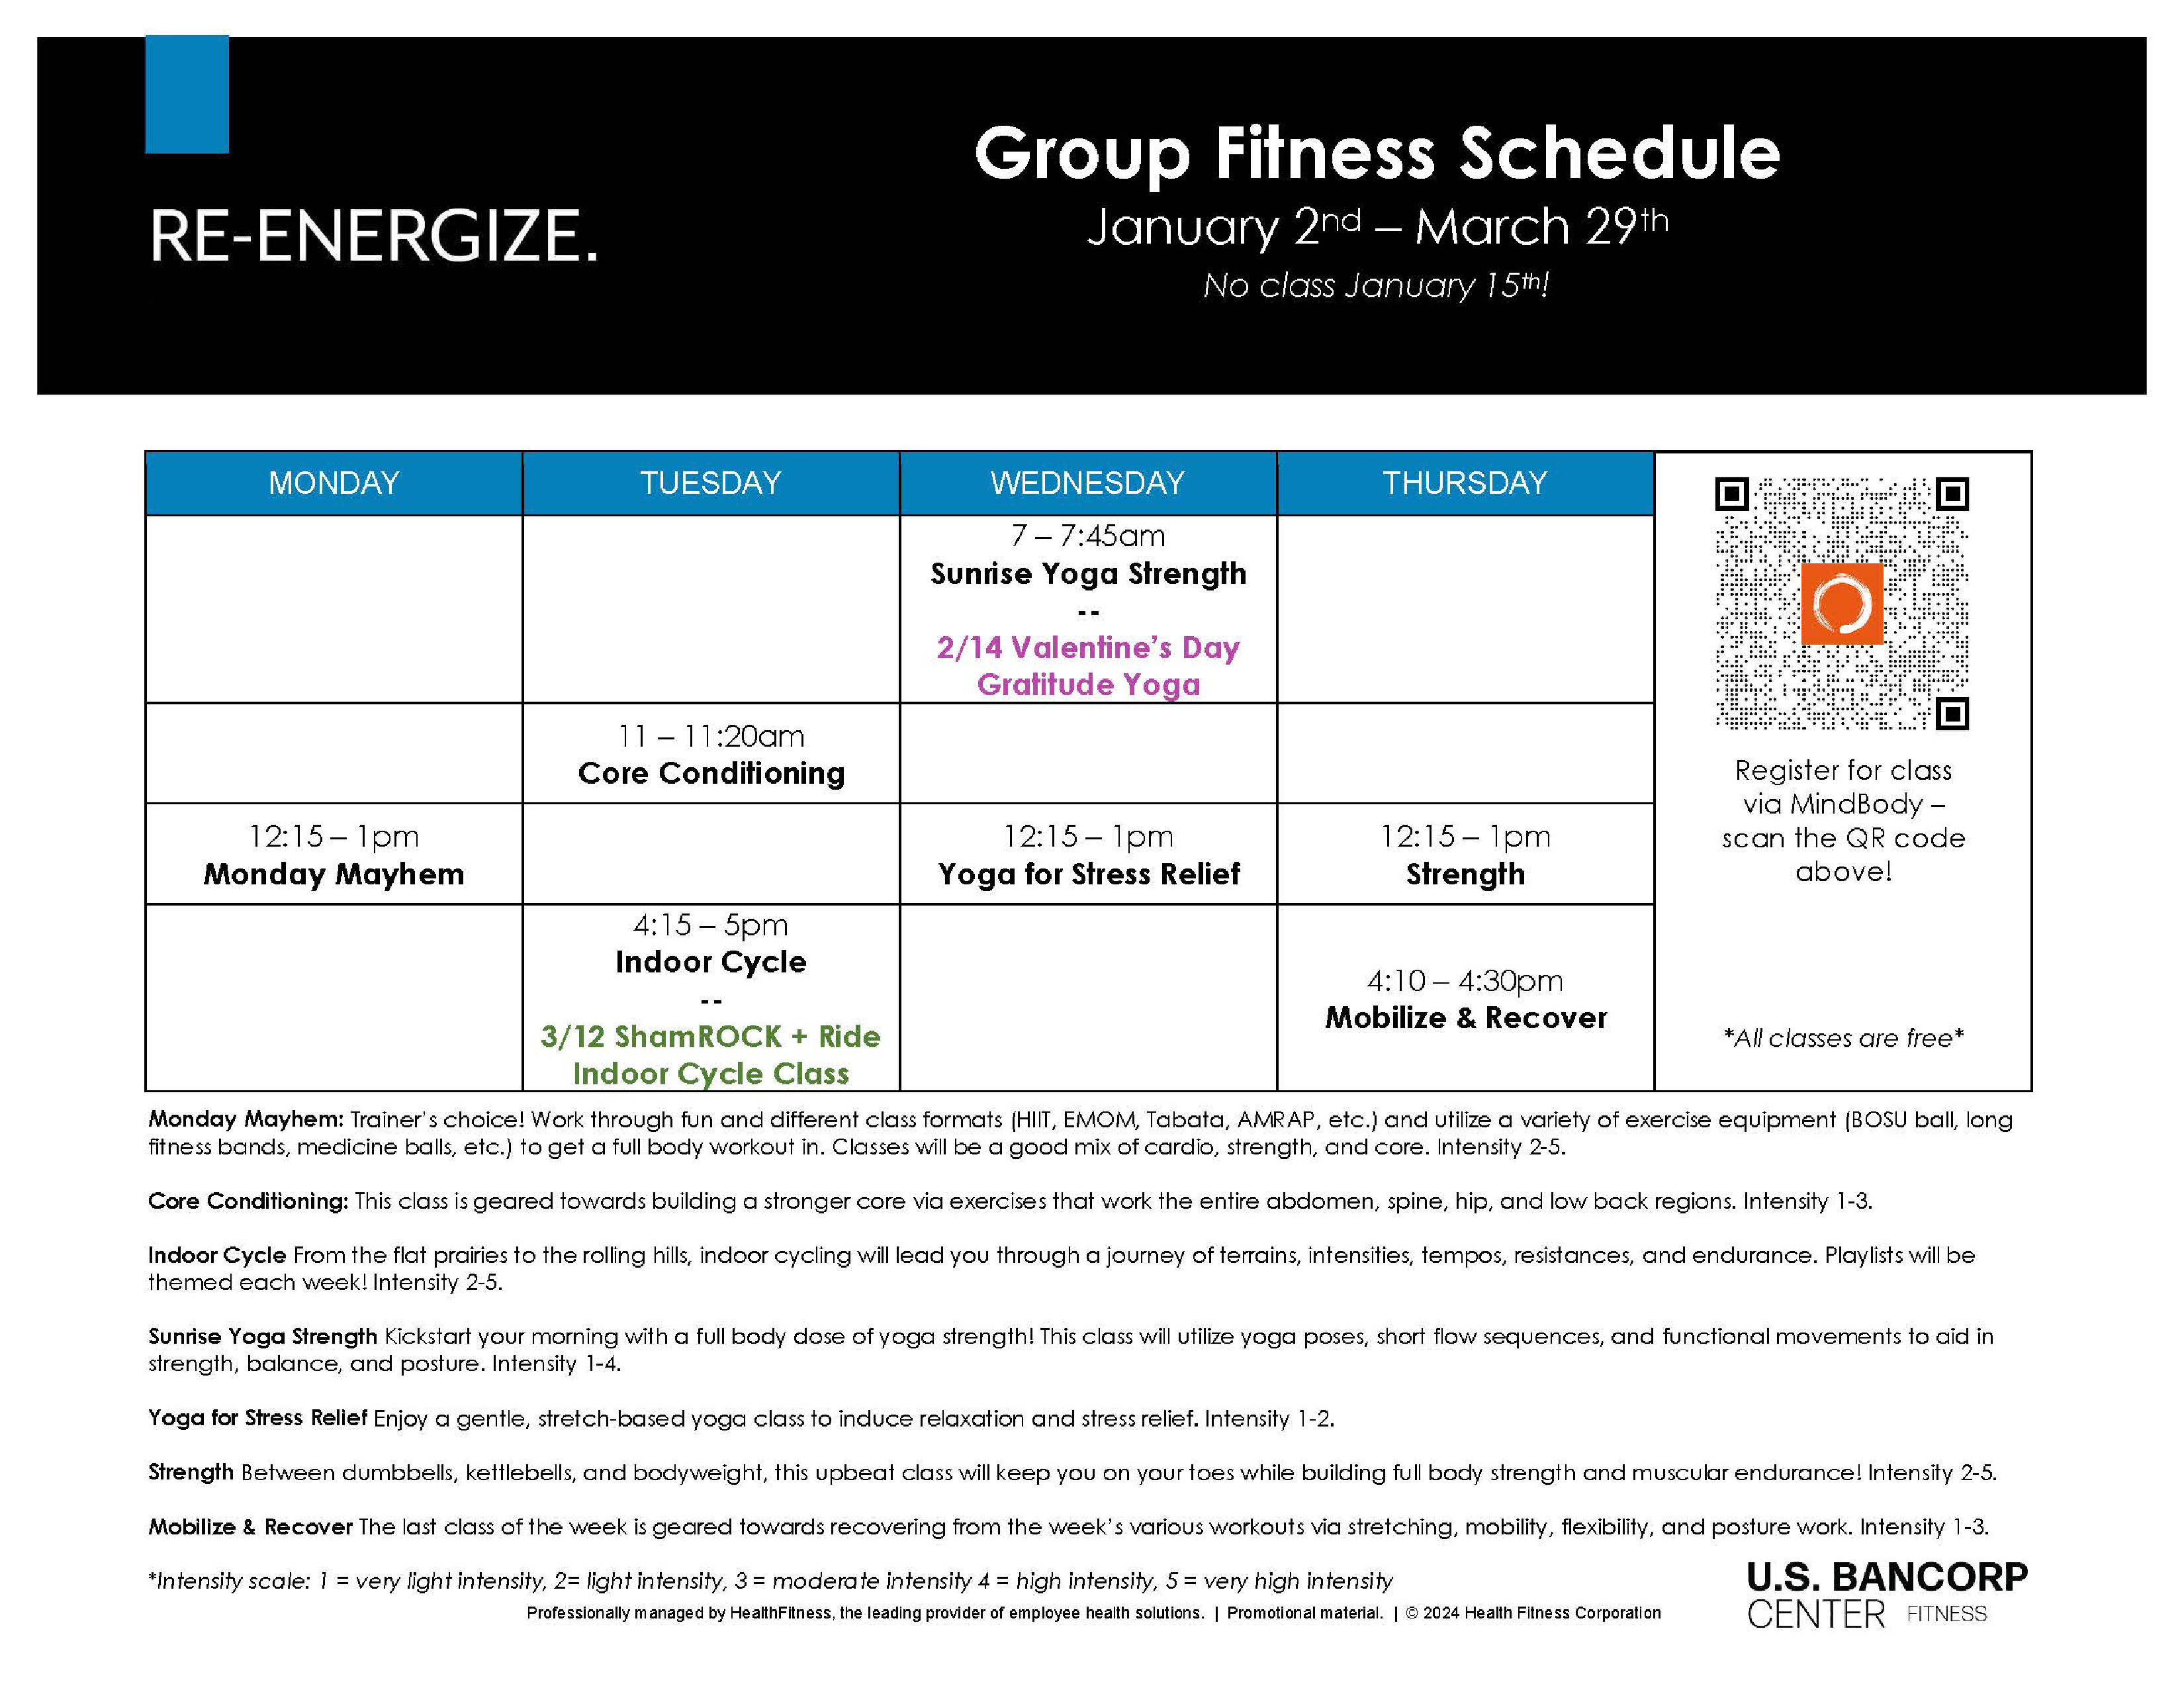 Exercise Schedule Image